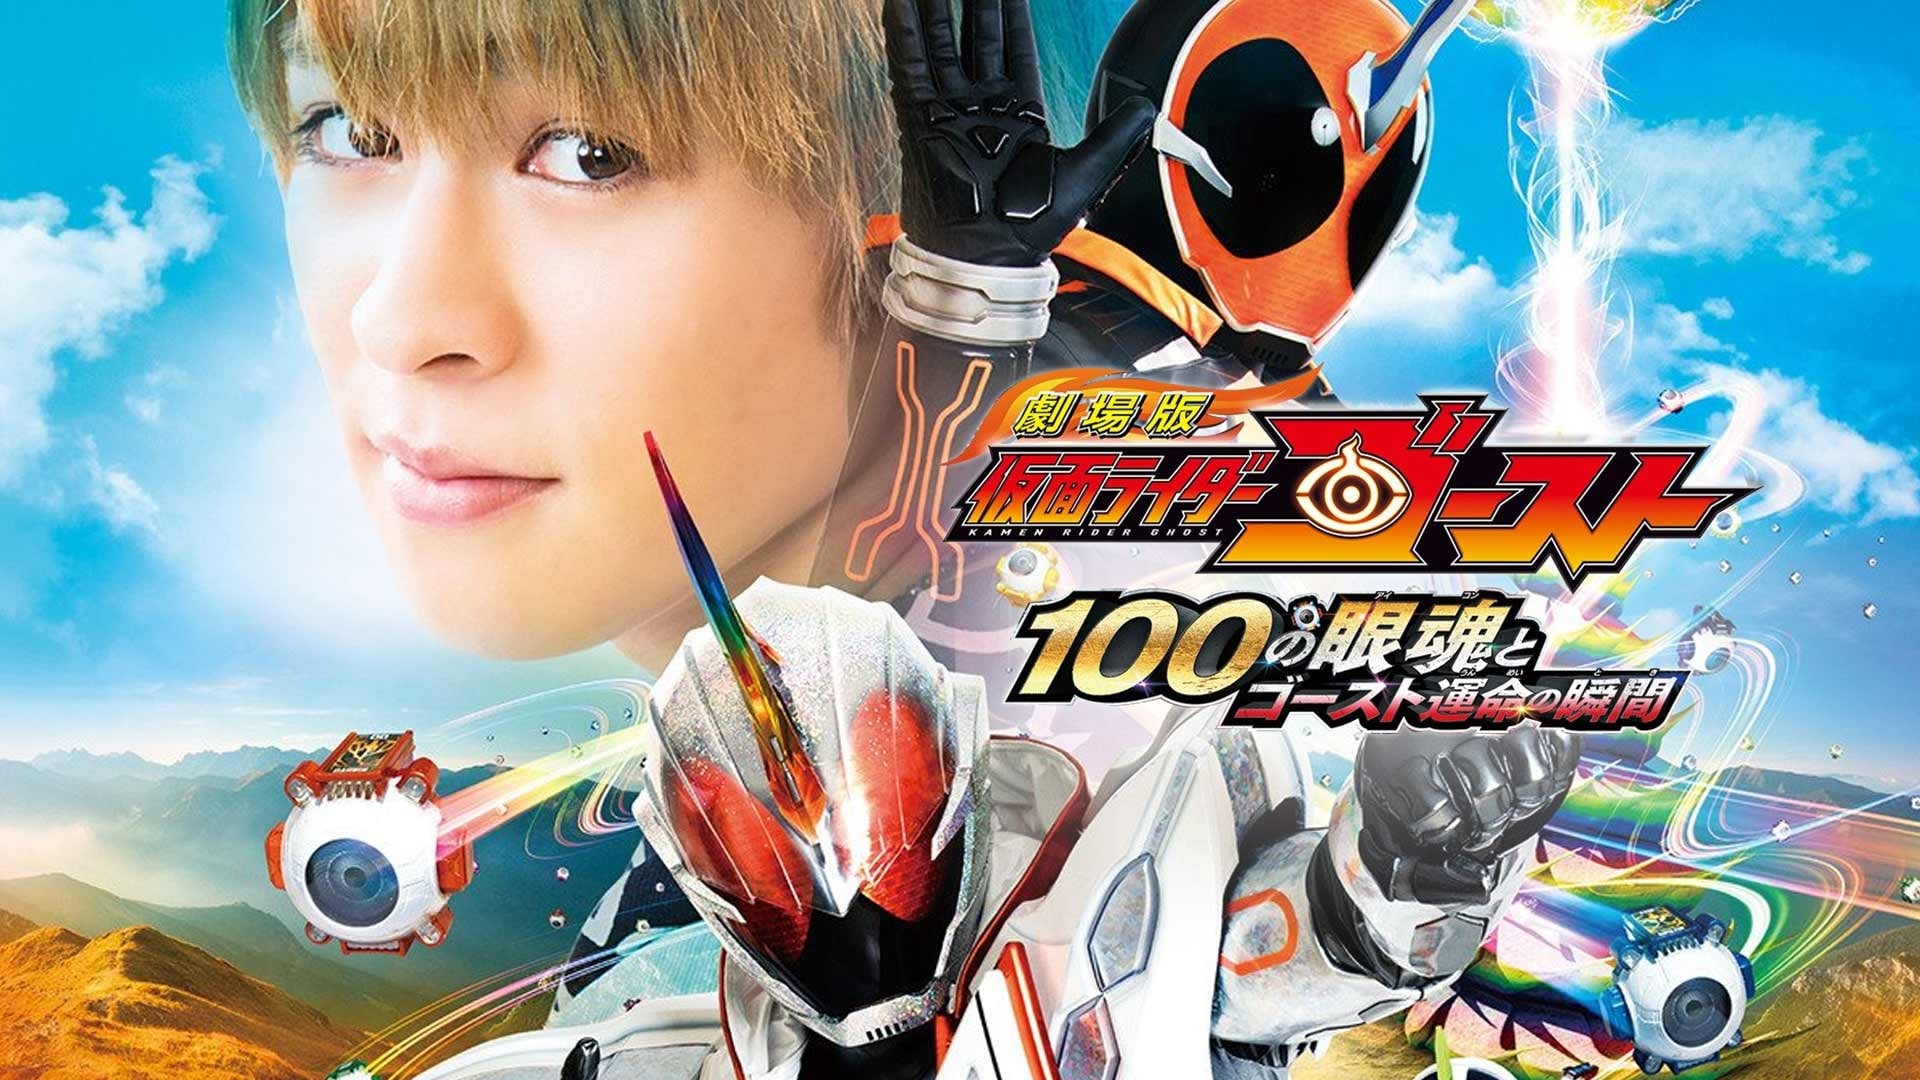 Kamen rider ghost movie: 100 eyecon và thời khắc định mệnh của ghost - Kamen rider ghost: the 100 eyecons and ghost’s fateful moment